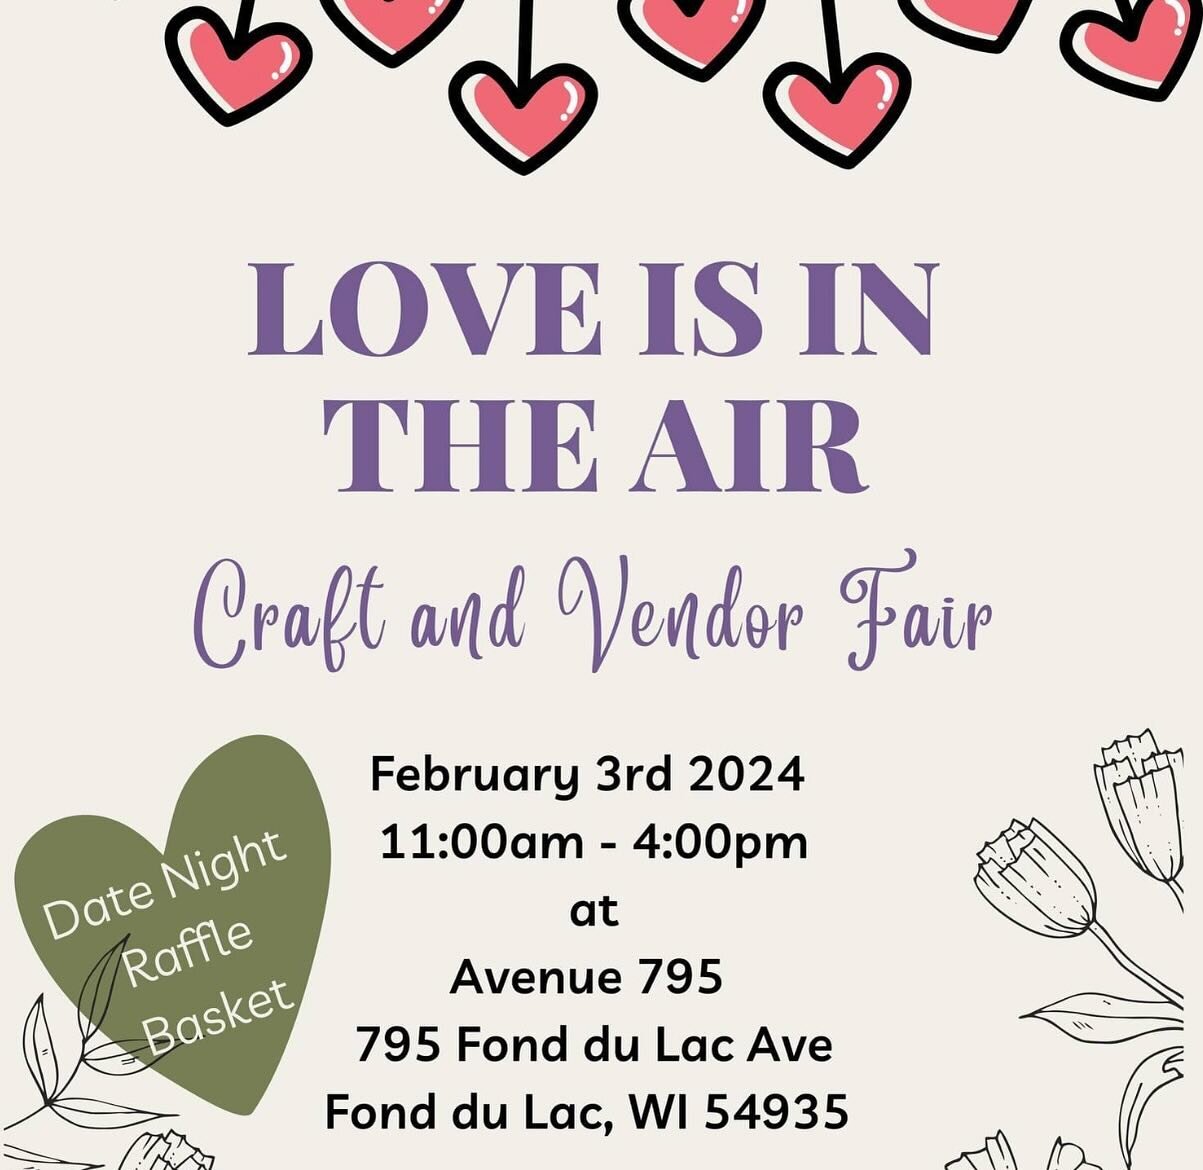 Get out of your house and come see us and all that the vendors have to offer!